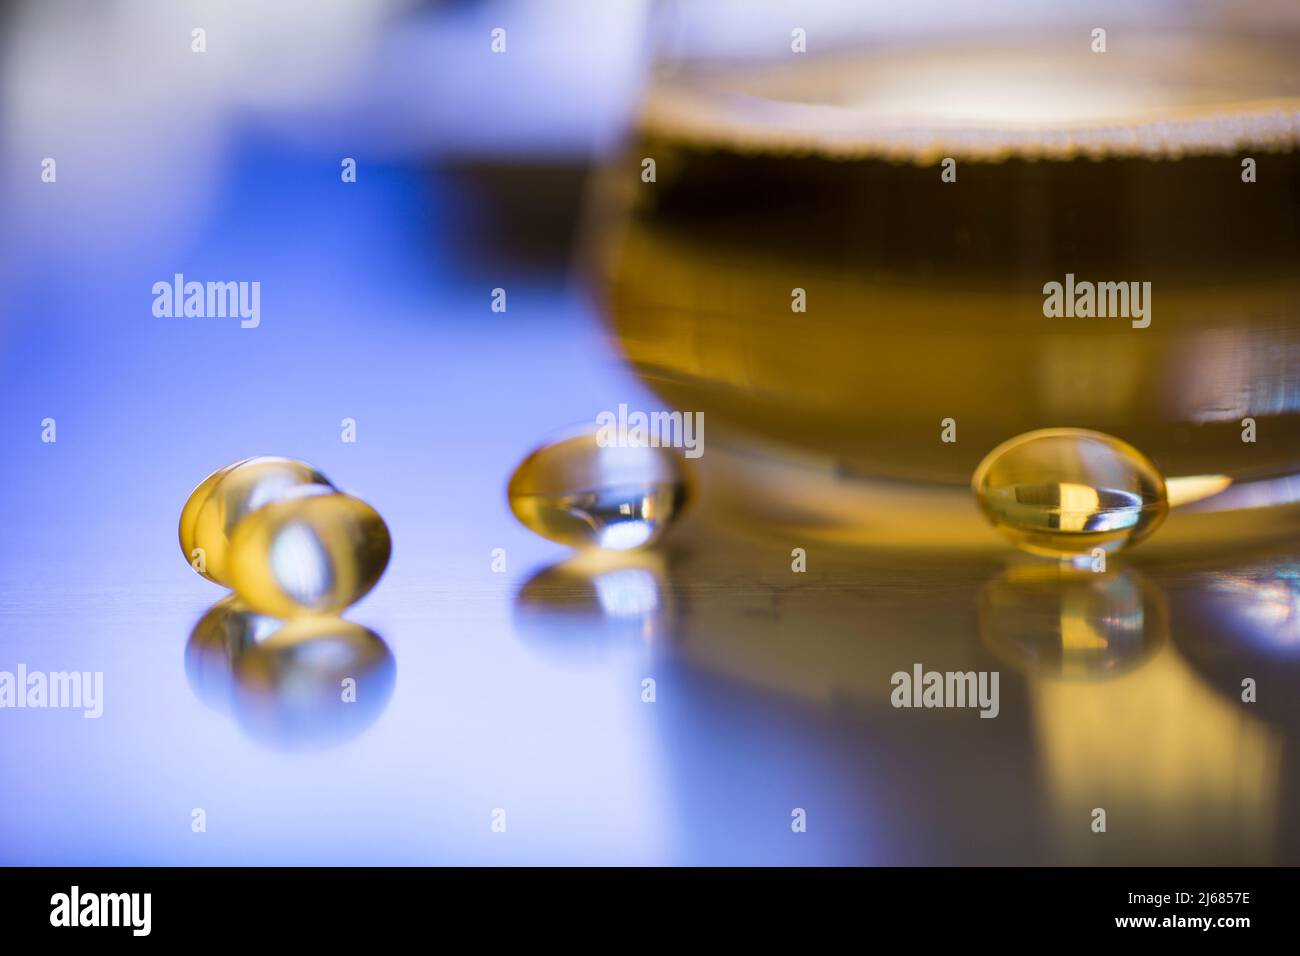 Conical flask containing a golden liquid medicine with Soft capsules and funnel - stock photo Stock Photo